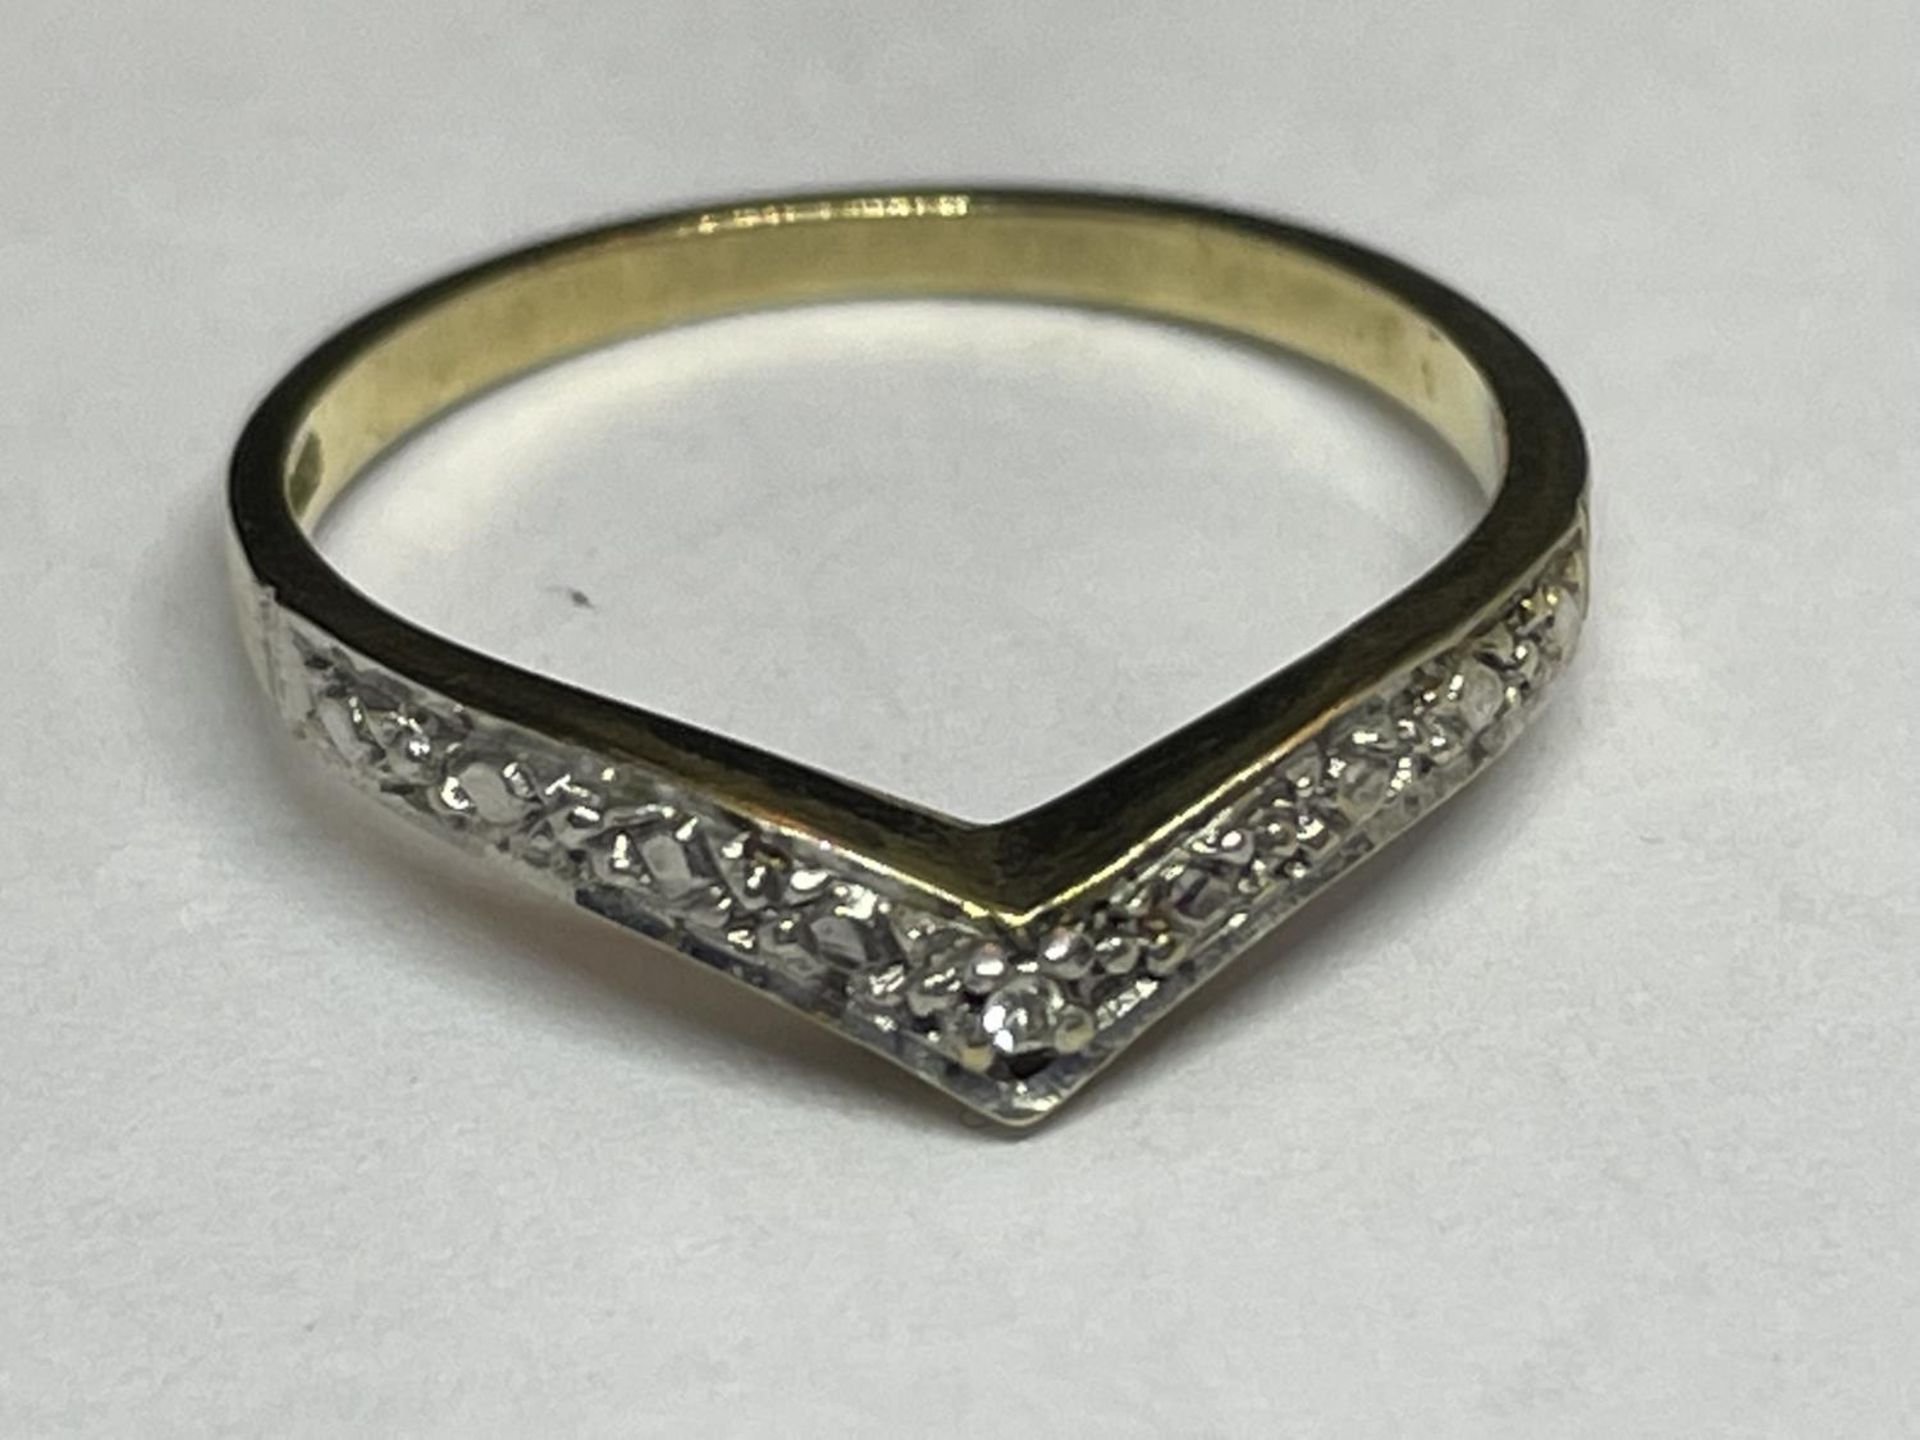 A 9 CARAT GOLD RING WITH DIAMONDS IN A WISHBONE DESIGN SIZE K